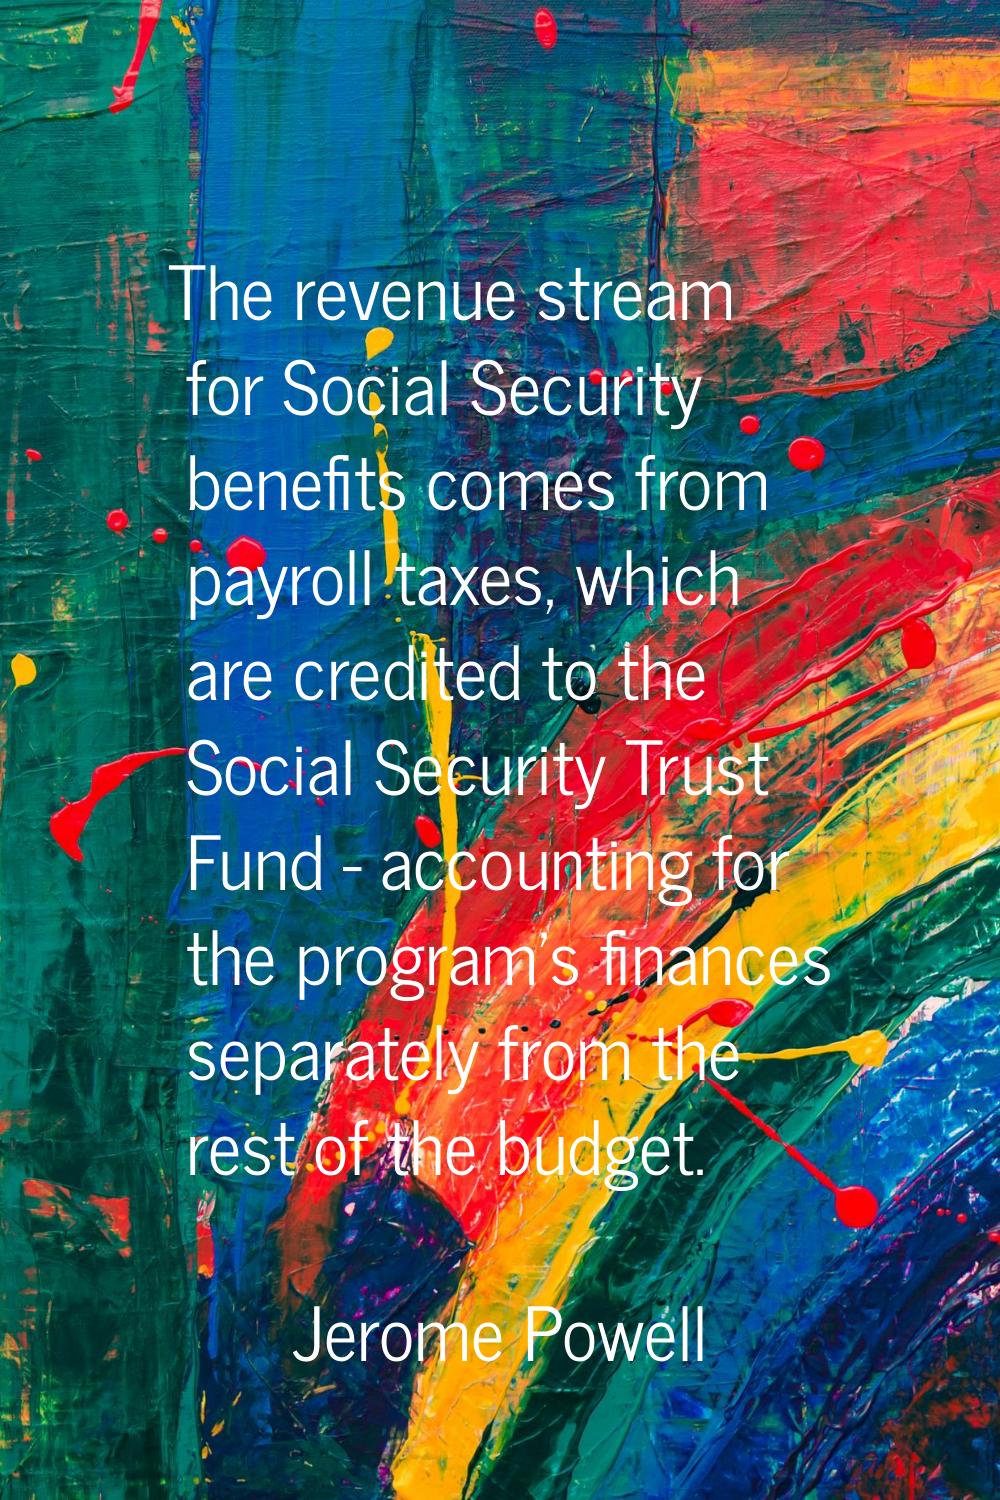 The revenue stream for Social Security benefits comes from payroll taxes, which are credited to the